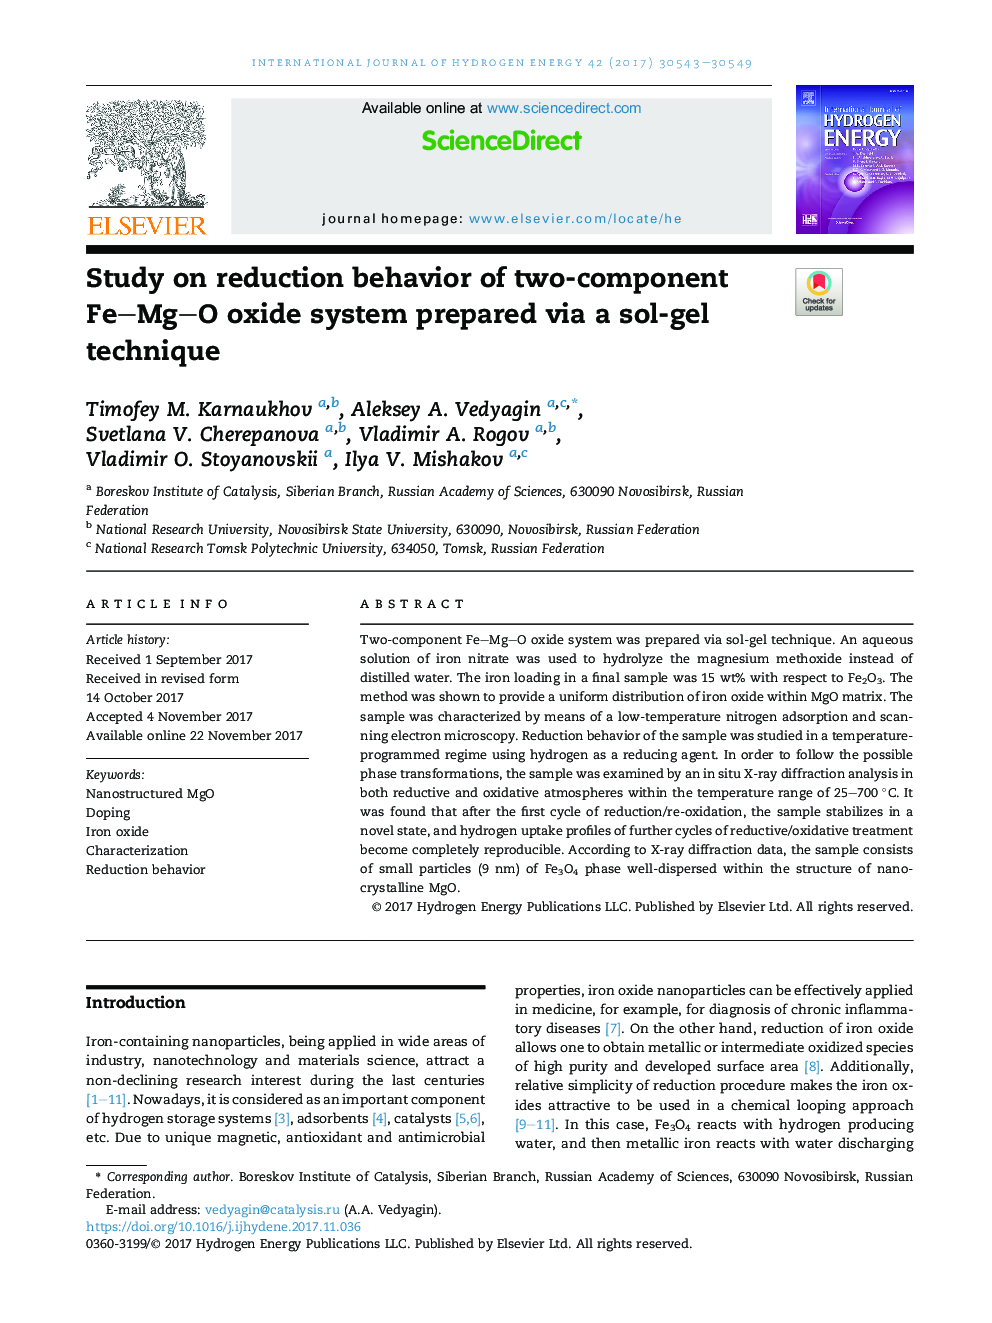 Study on reduction behavior of two-component FeMgO oxide system prepared via a sol-gel technique